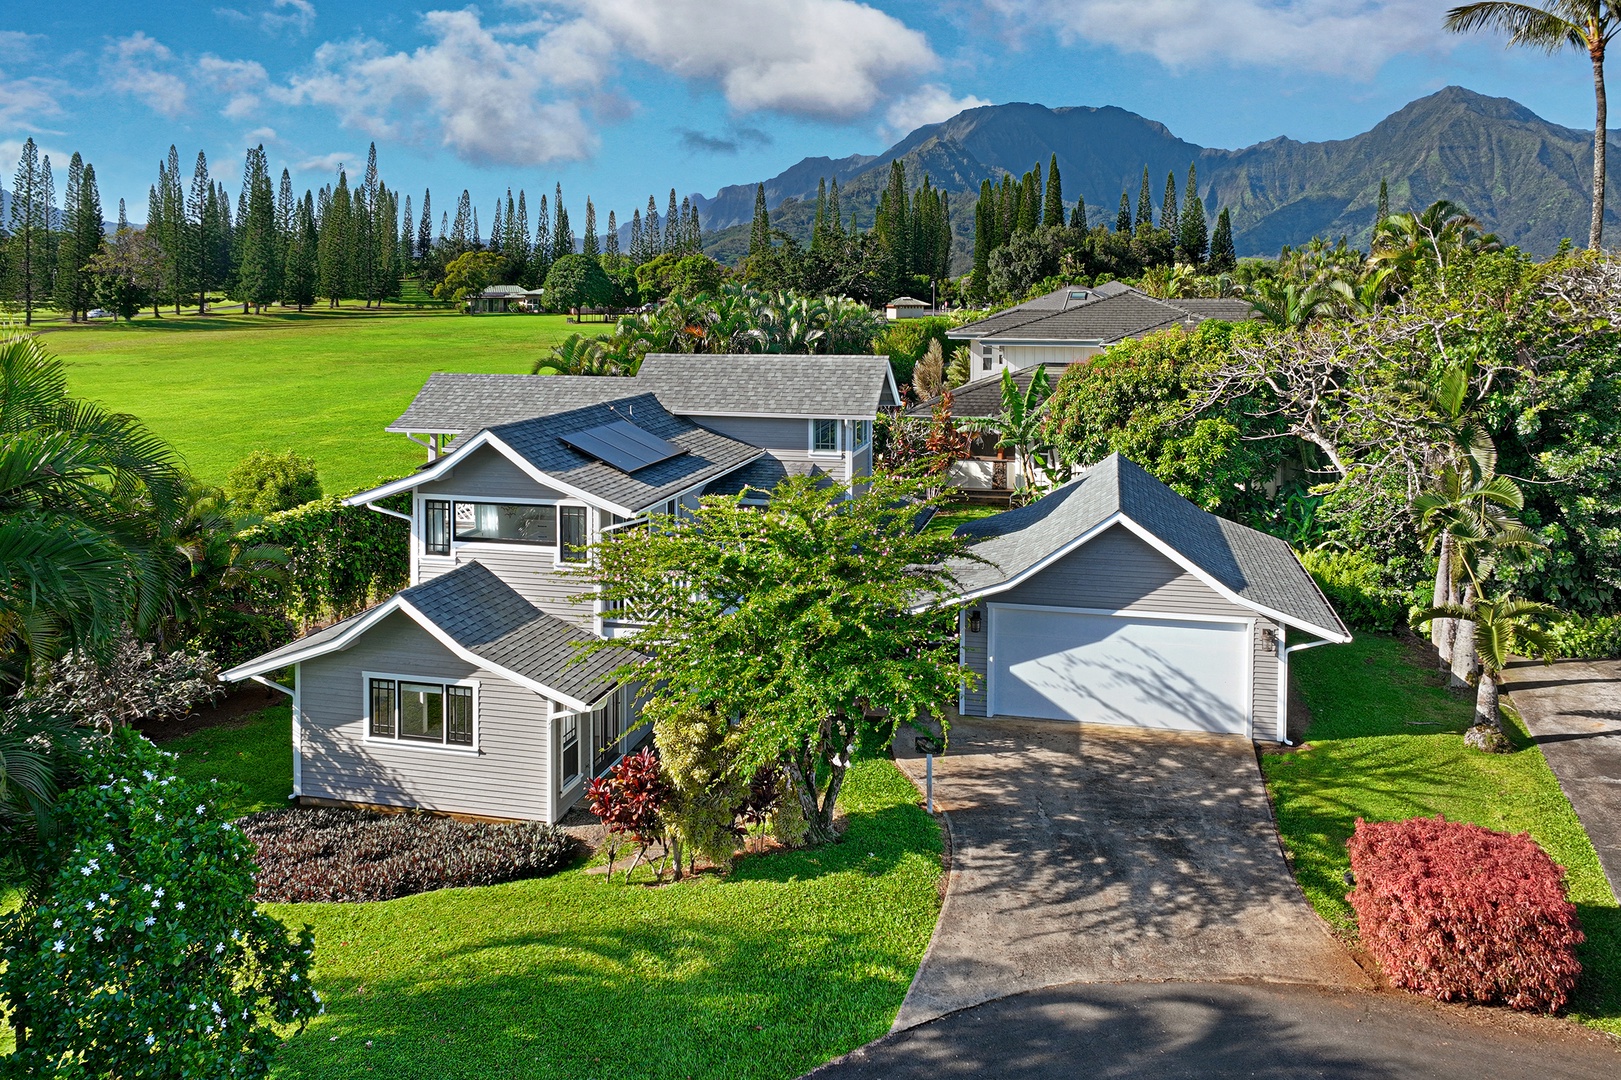 Princeville Vacation Rentals, Kaiana Villa - The Home is immersed in the stunning Hawaii beauty